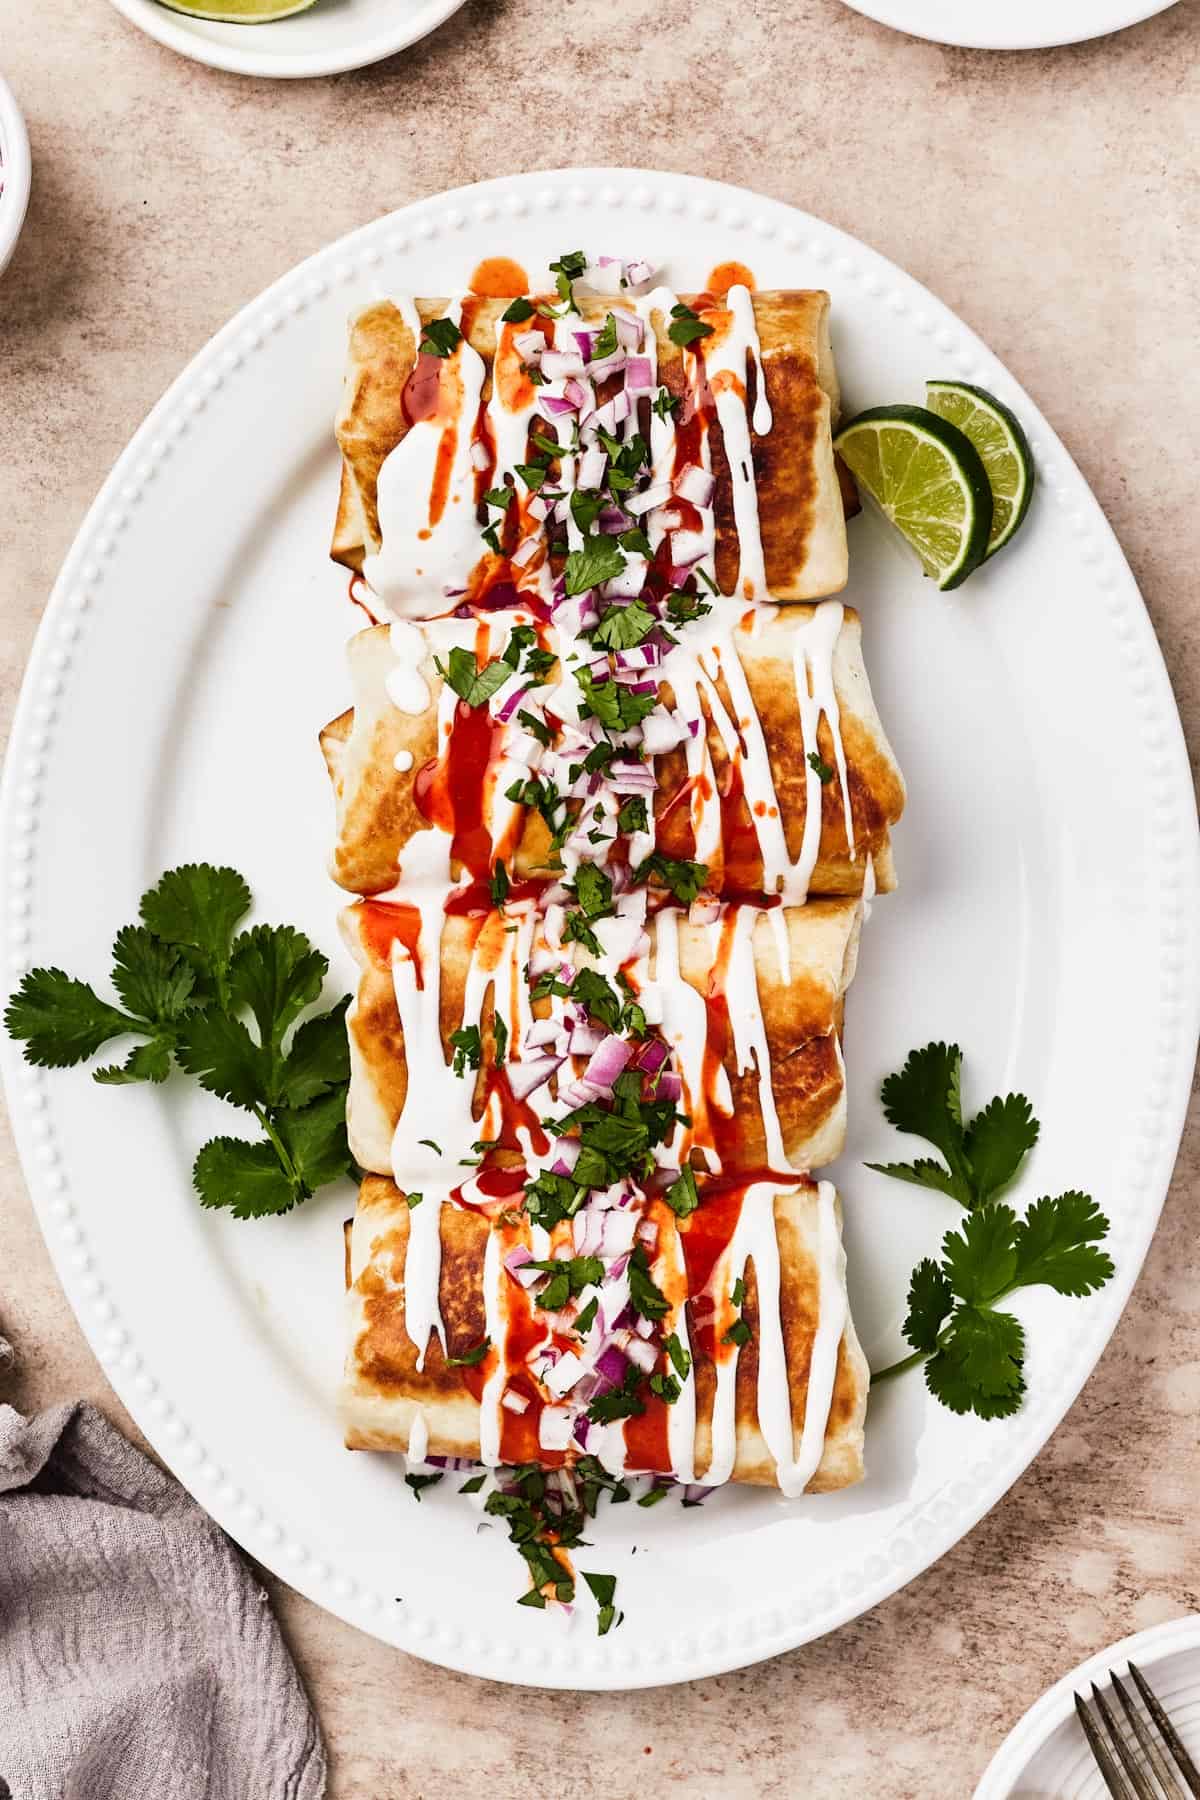 A plate of fried chimichangas, garnished with sour cream, hot sauce, cilantro, lime, and chopped red onion.